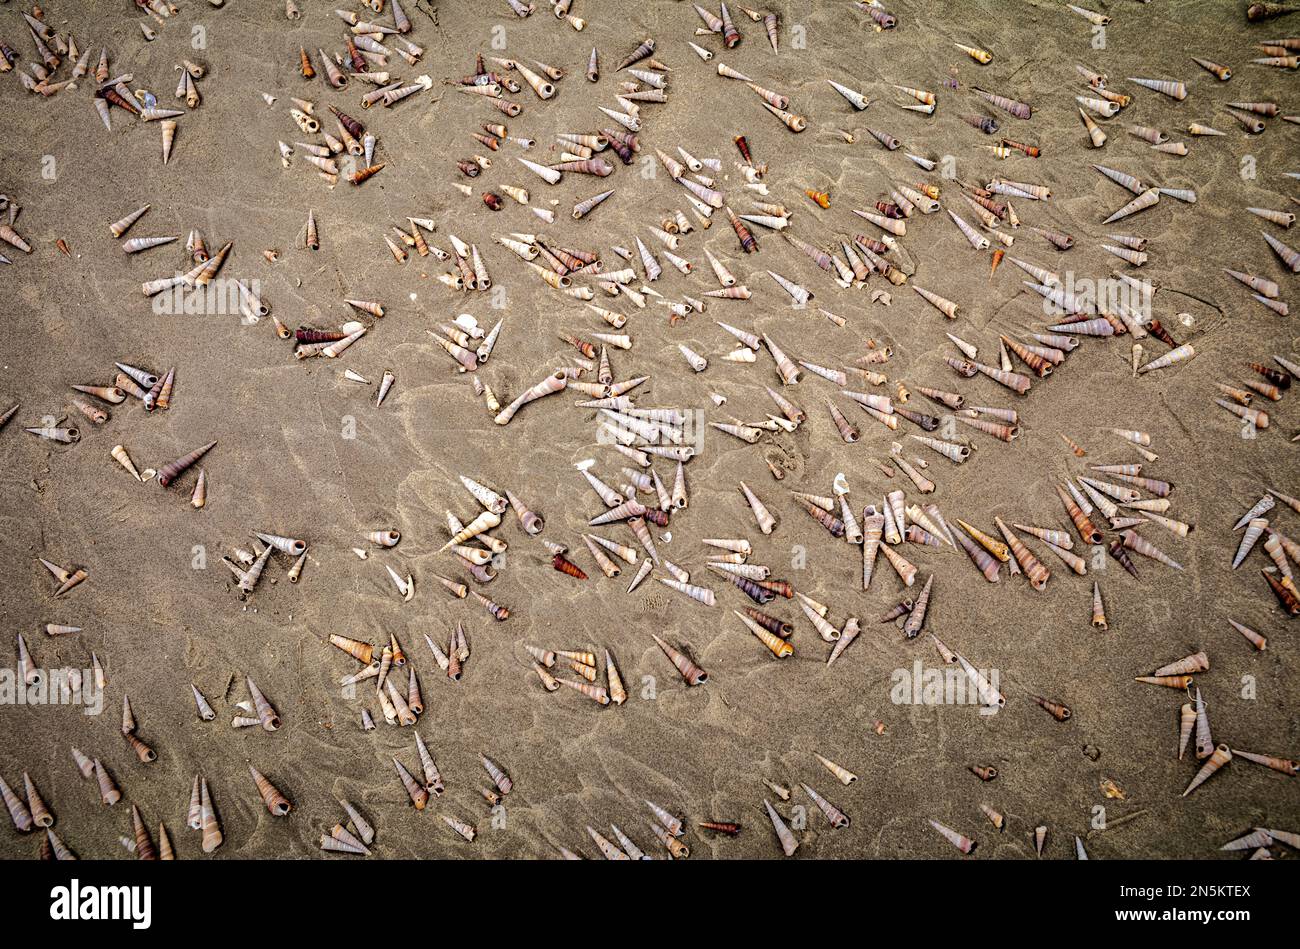 Stranded seashells from Spire Molluscs left by the retreating tide, lie on the beach at Tra Co, near Mong Cai, Vietnam. Stock Photo